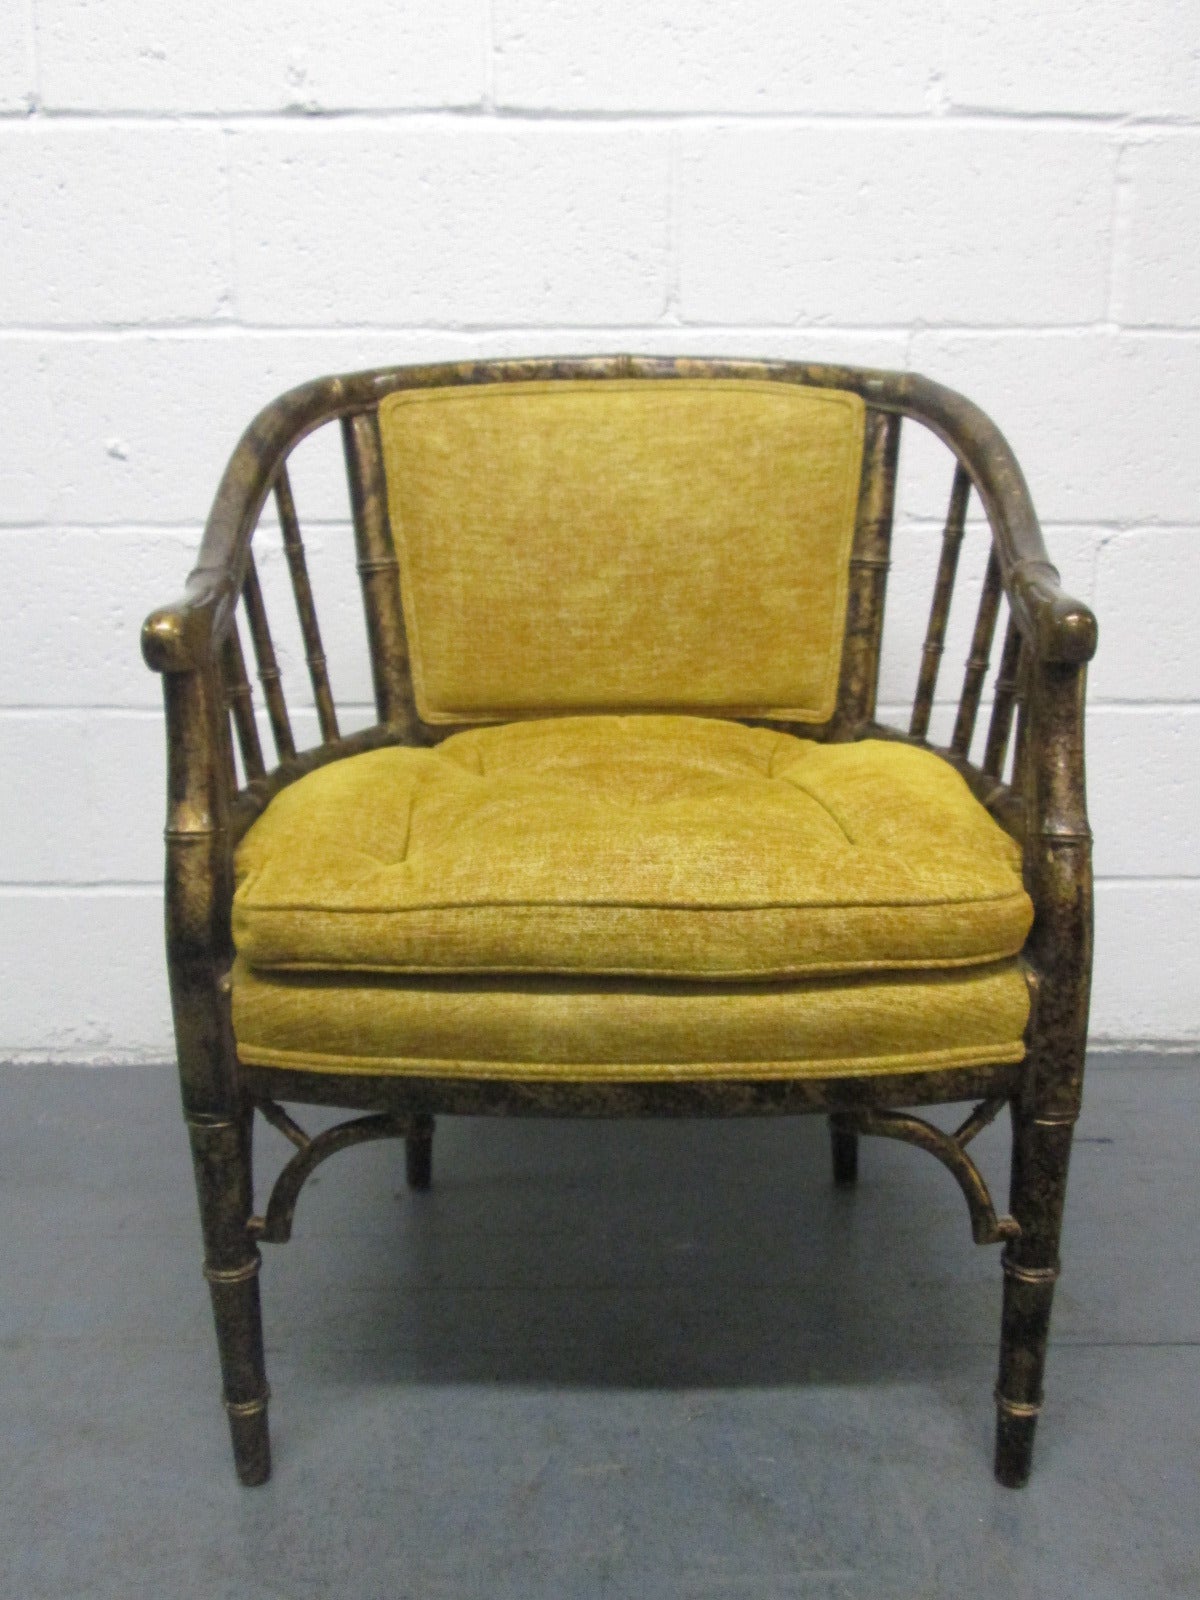 Pair Faux Bamboo Tortoise Finish Chairs by Baker.  Has a lacquered faux tortoise finish. Hollywood Regency Style.